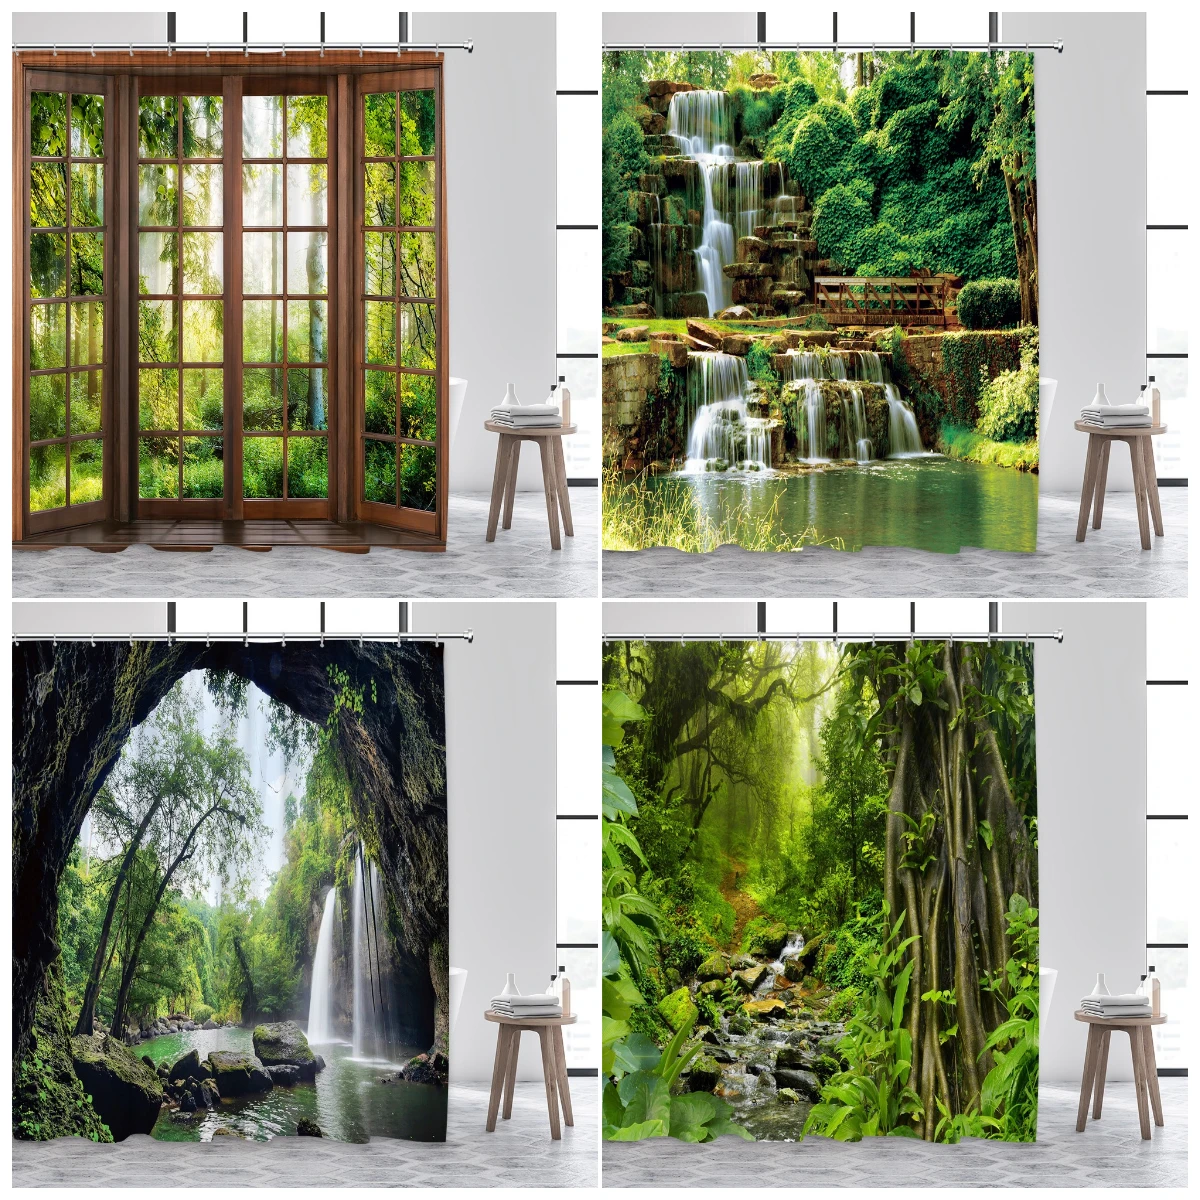 

Forest Landscape Shower Curtains Tropical Jungle Plants Waterfall Park Nature Scenery Fabric Bathroom Curtain Decor With Hooks